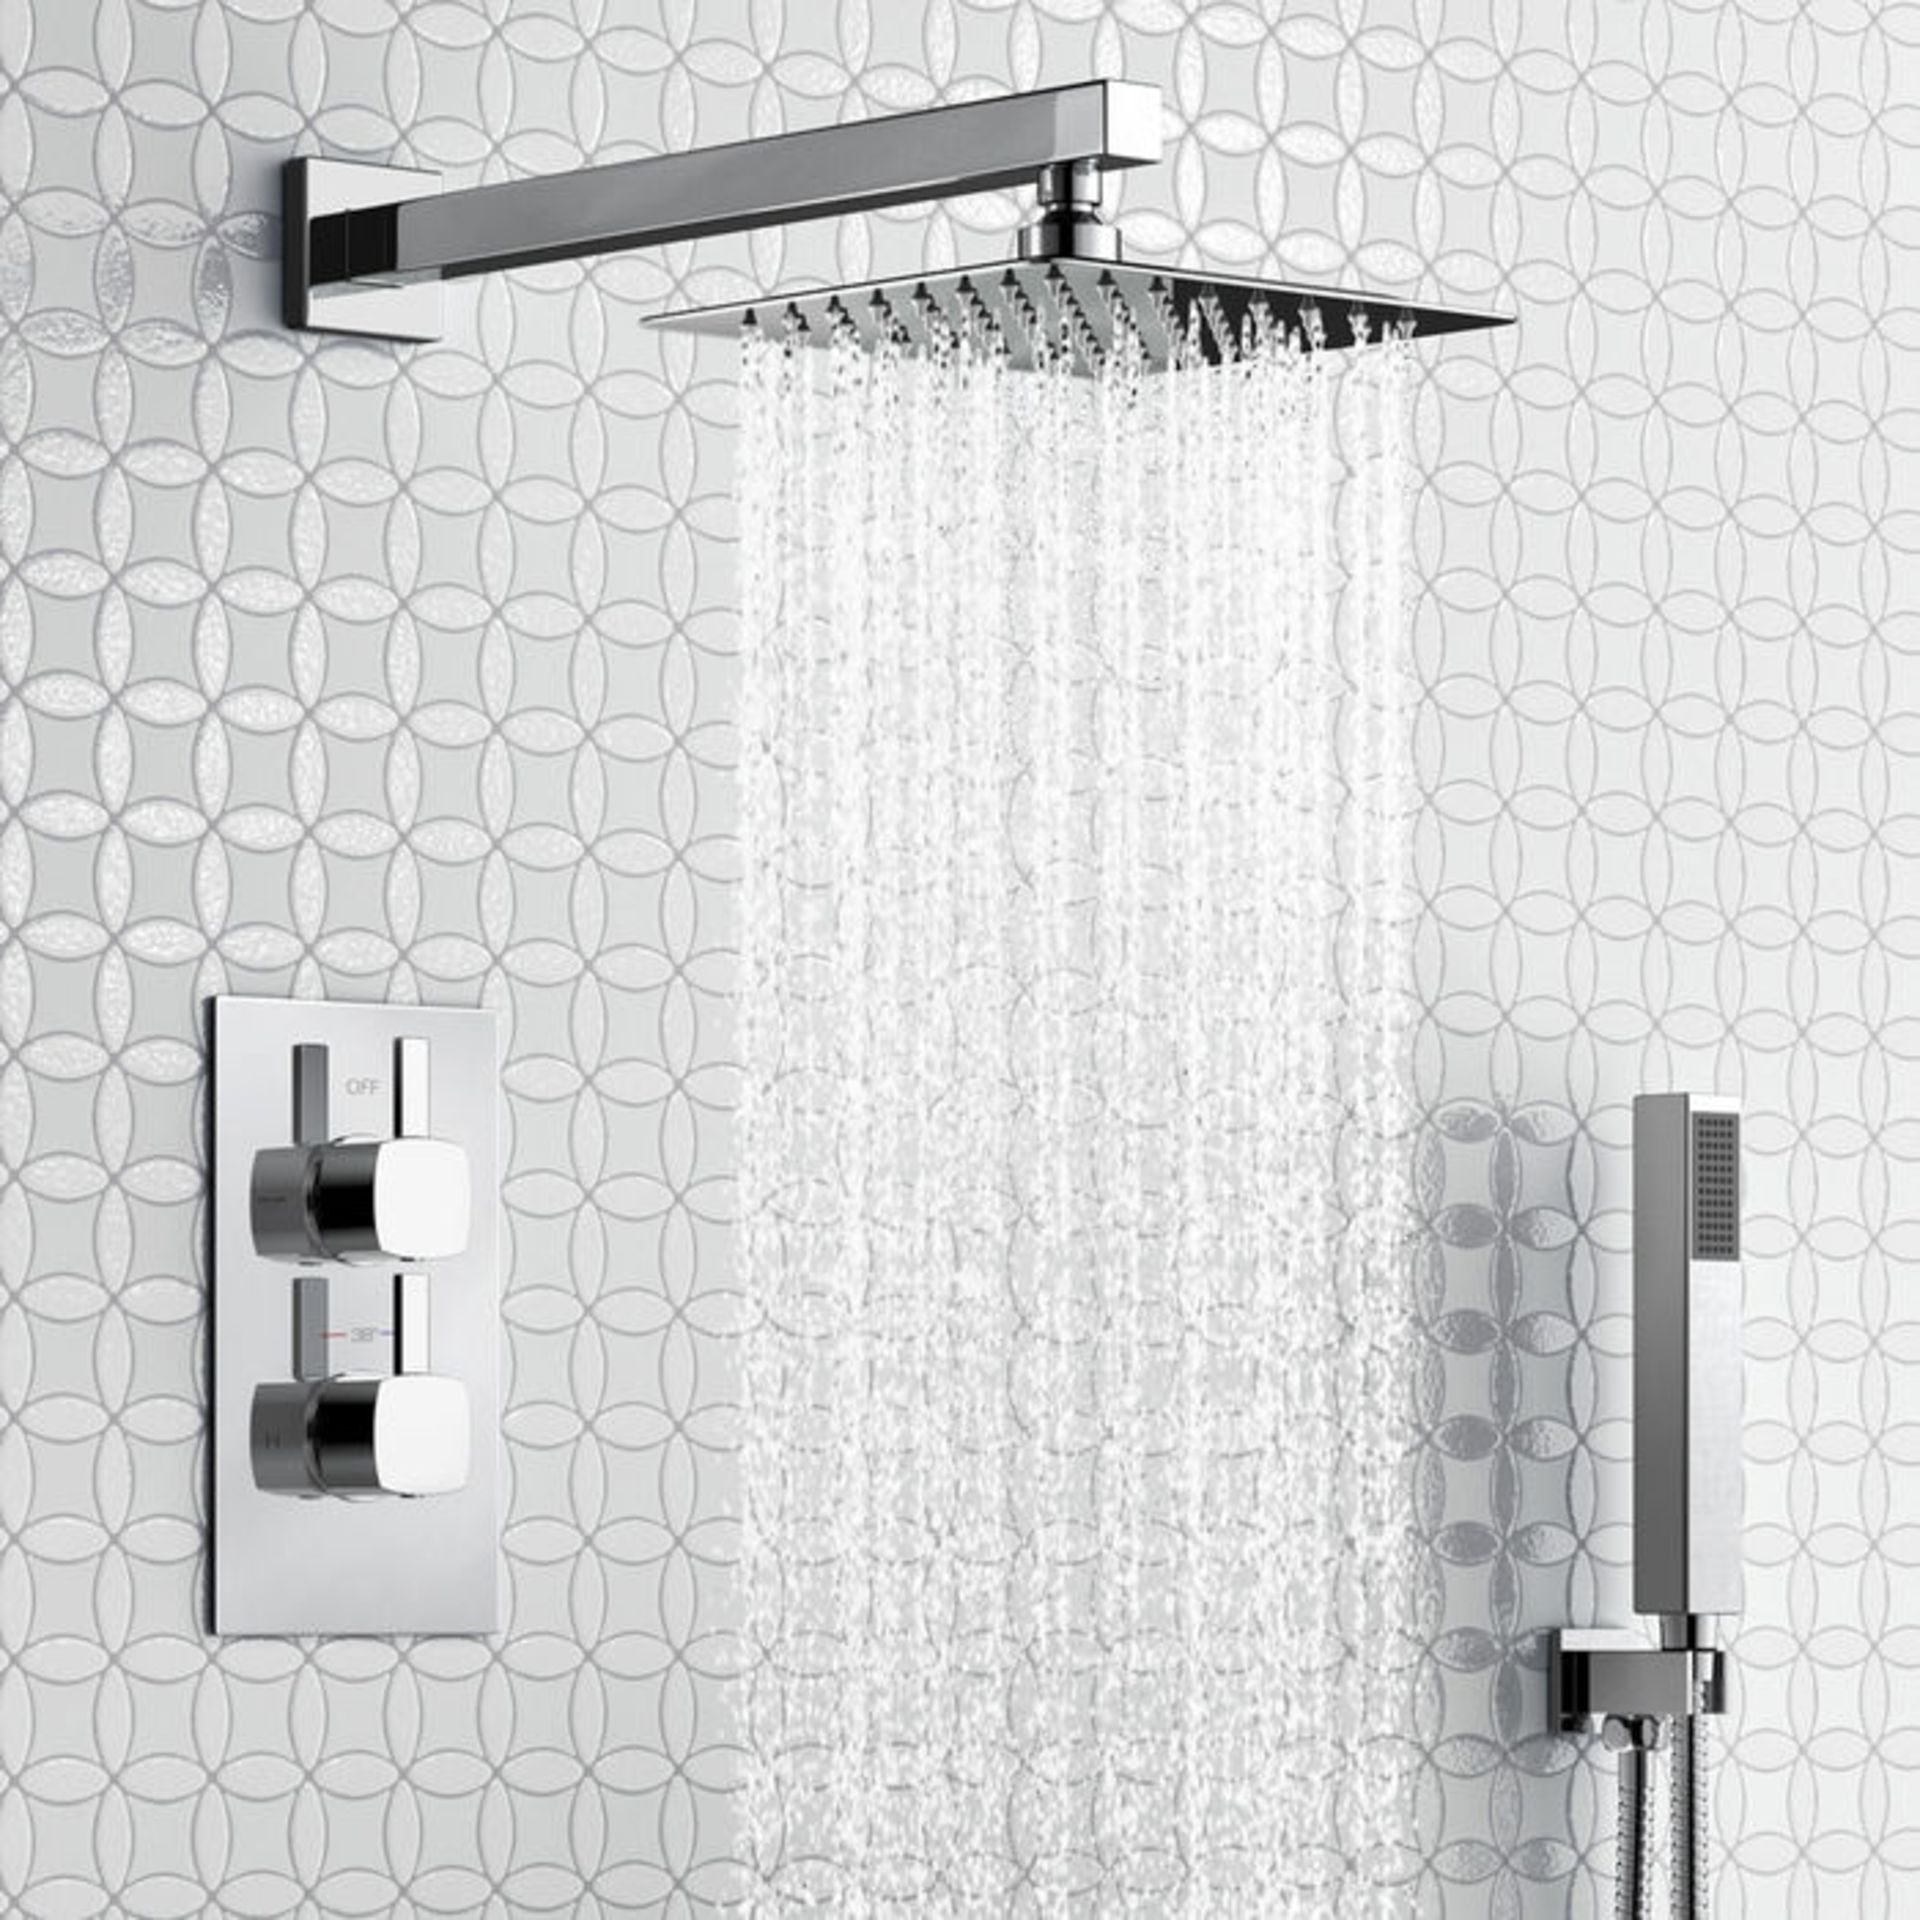 (O53) Square Concealed Thermostatic Mixer Shower Kit & Medium Head. Family friendly detachable